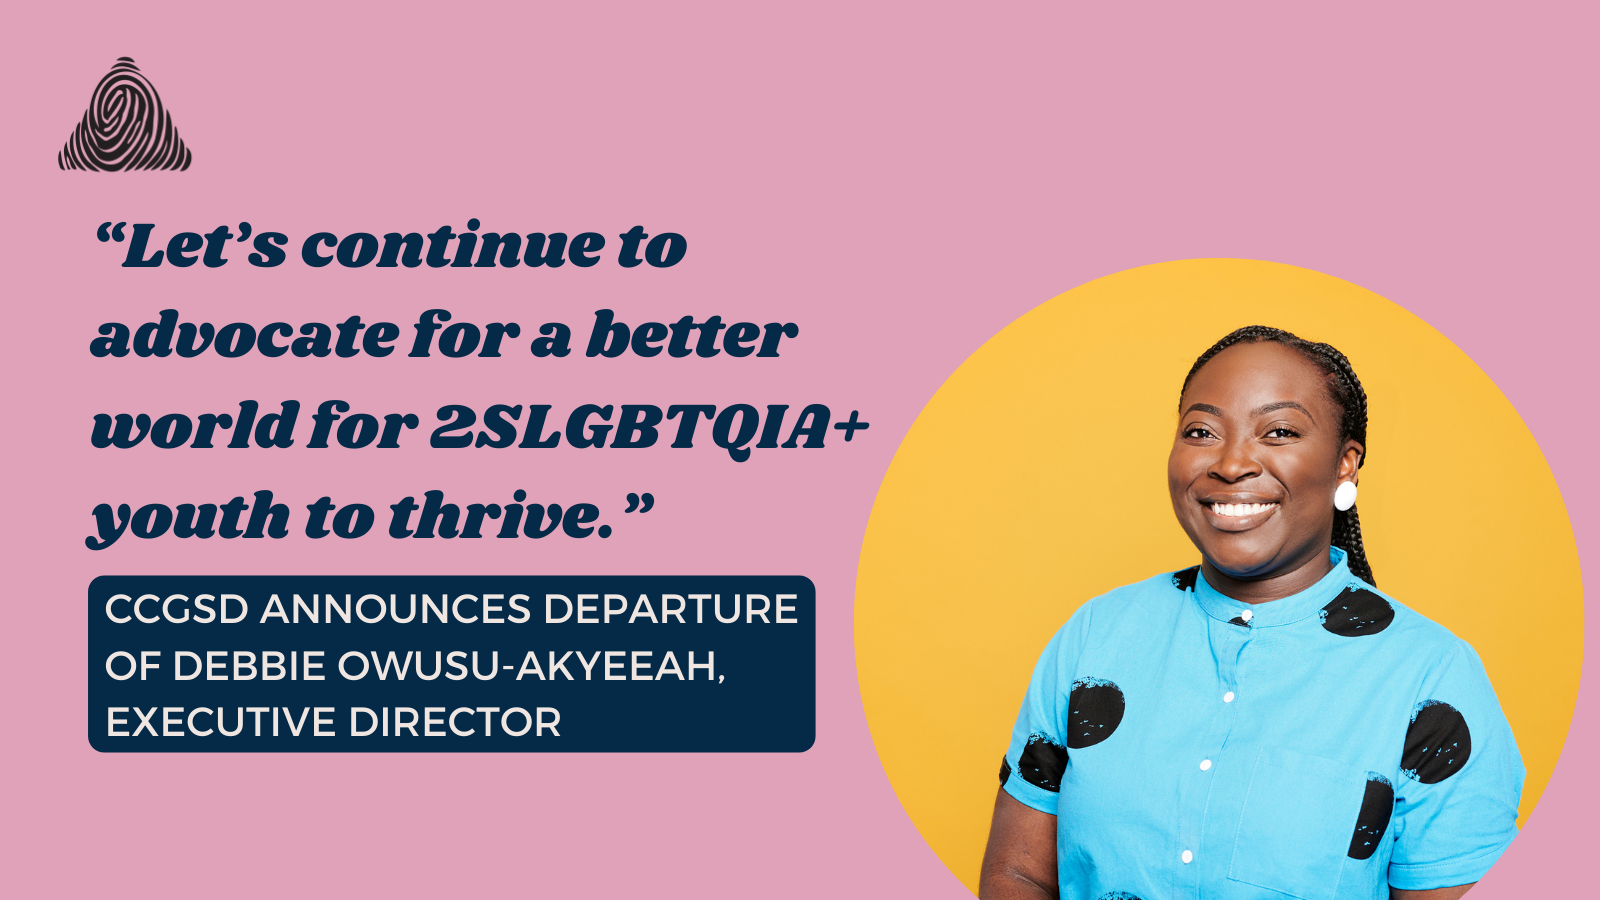 “Let’s continue to advocate for a better world for 2SLGBTQIA+ youth to thrive.” CCGSD Announces Departure of Debbie Owusu-Akyeeah,      Executive Director.